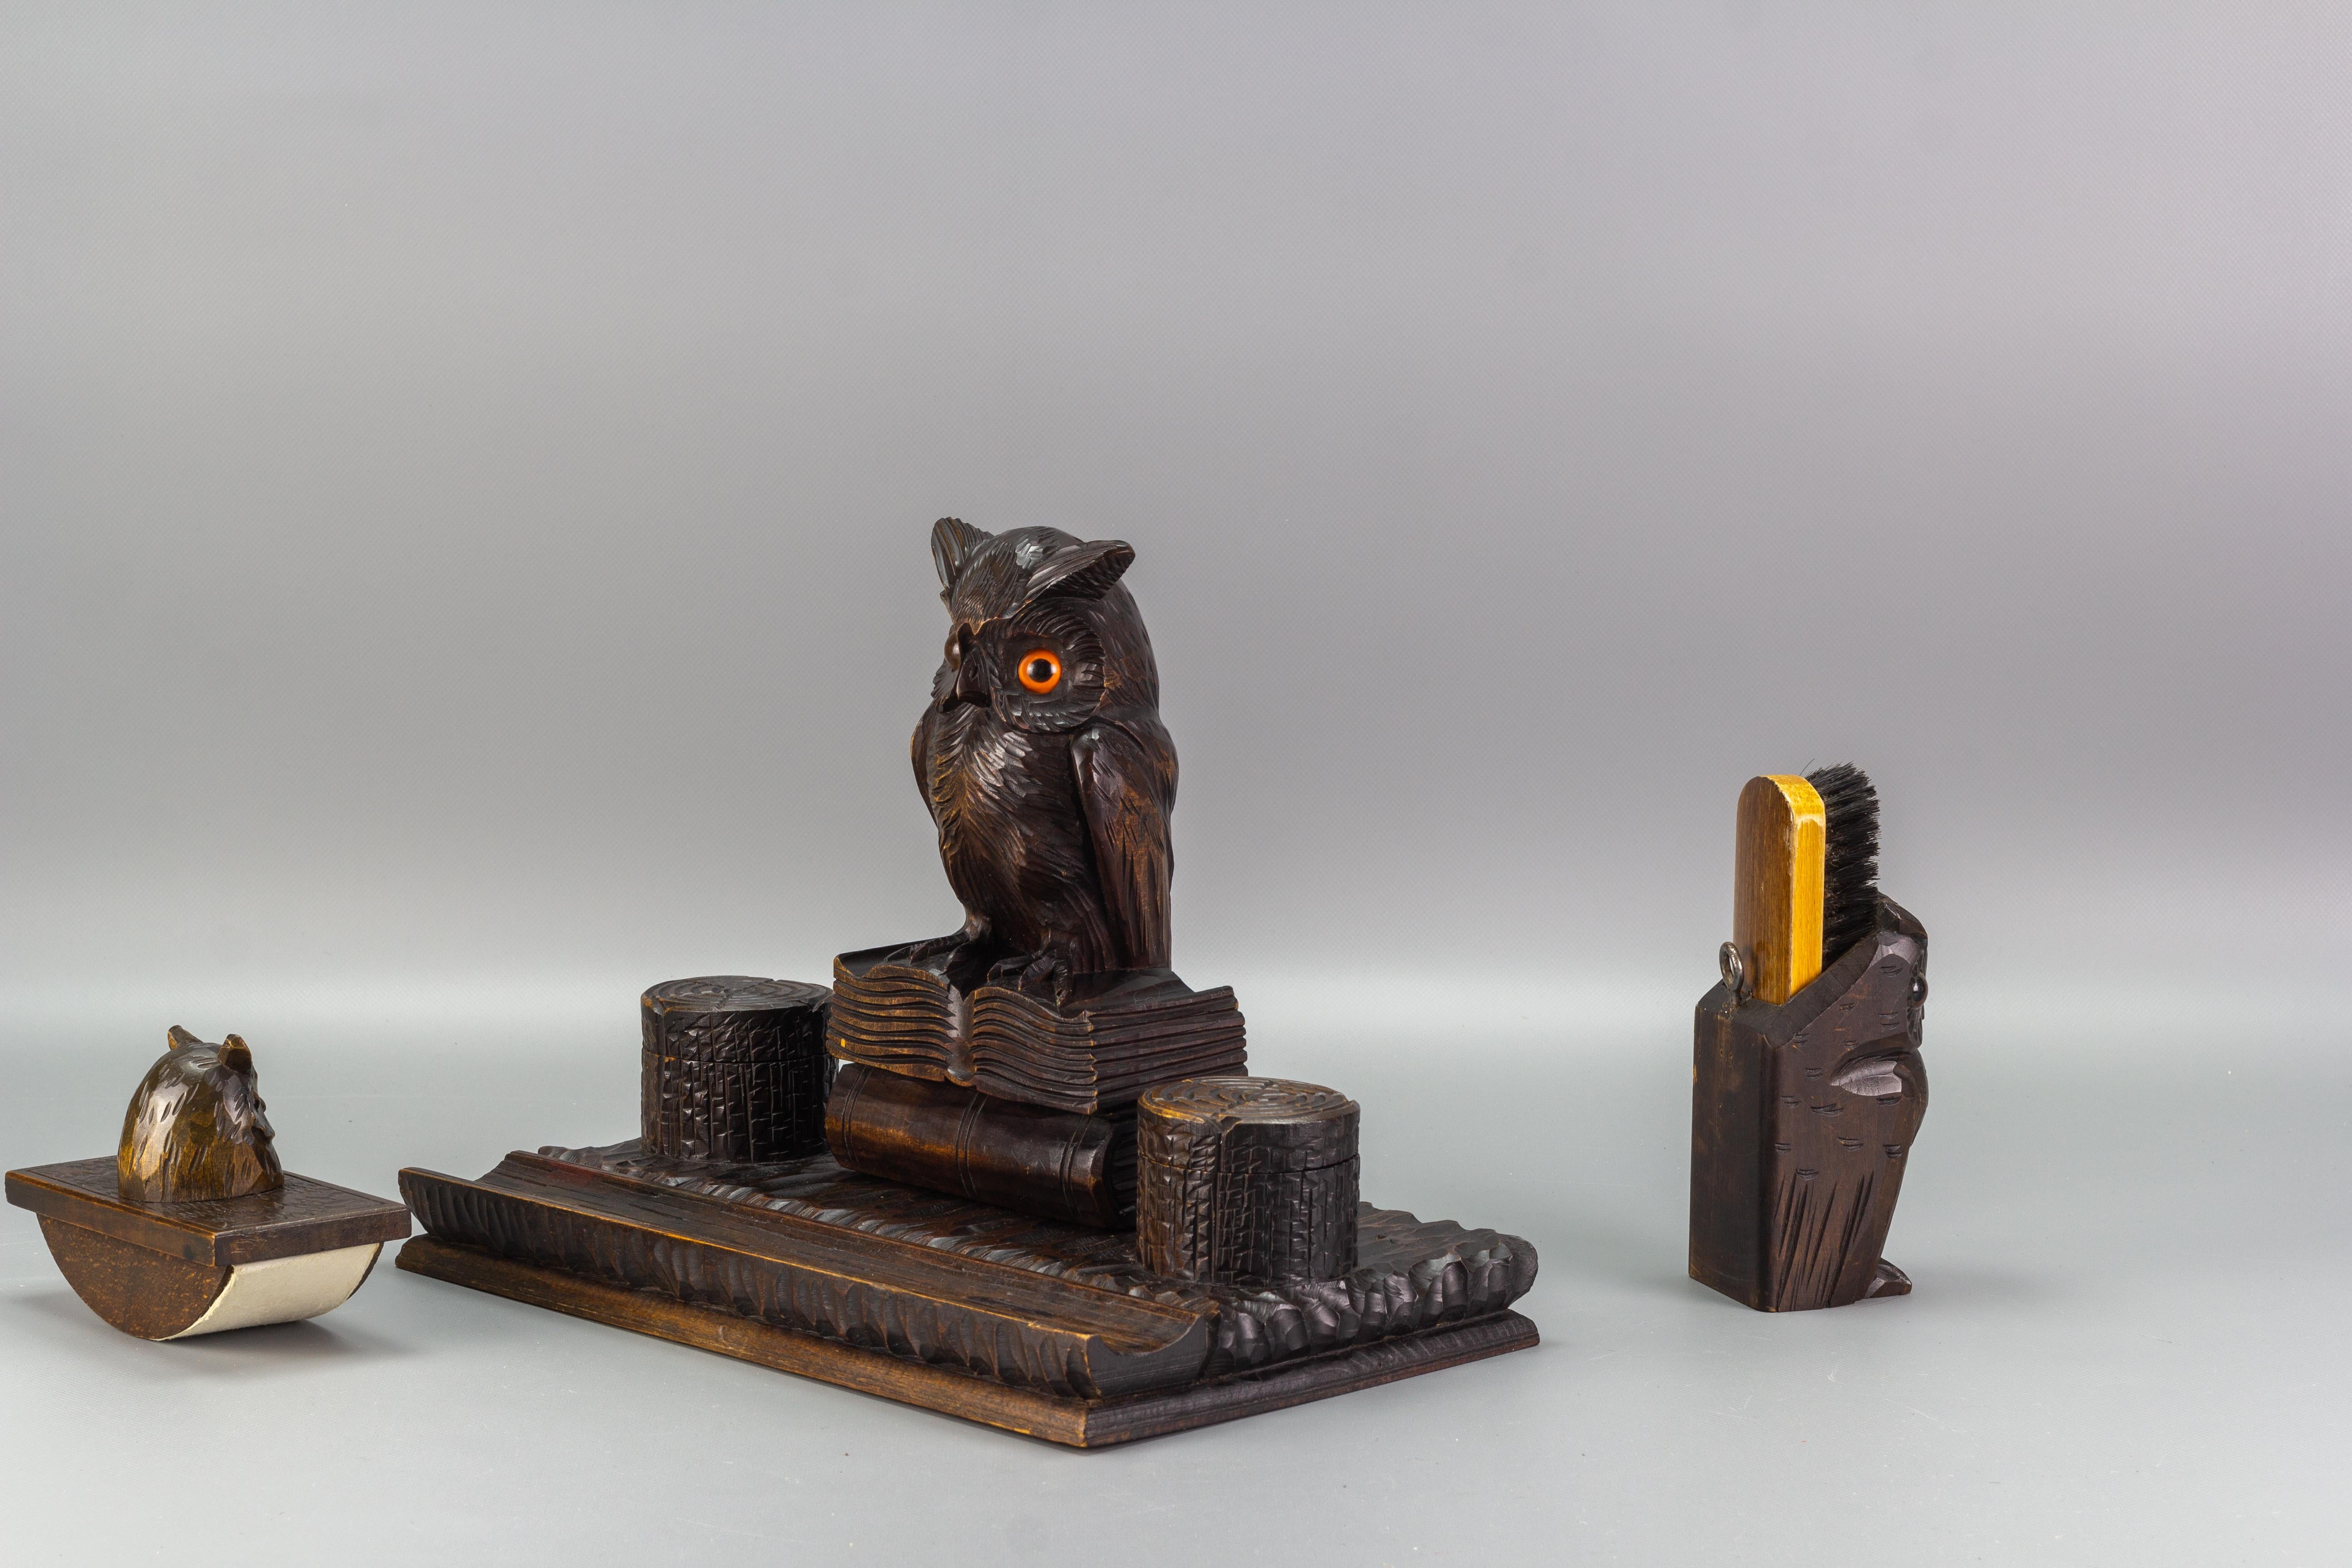 Hand-Carved Wooden Inkwell Desk Set with Owl Figures, 1930s For Sale 2